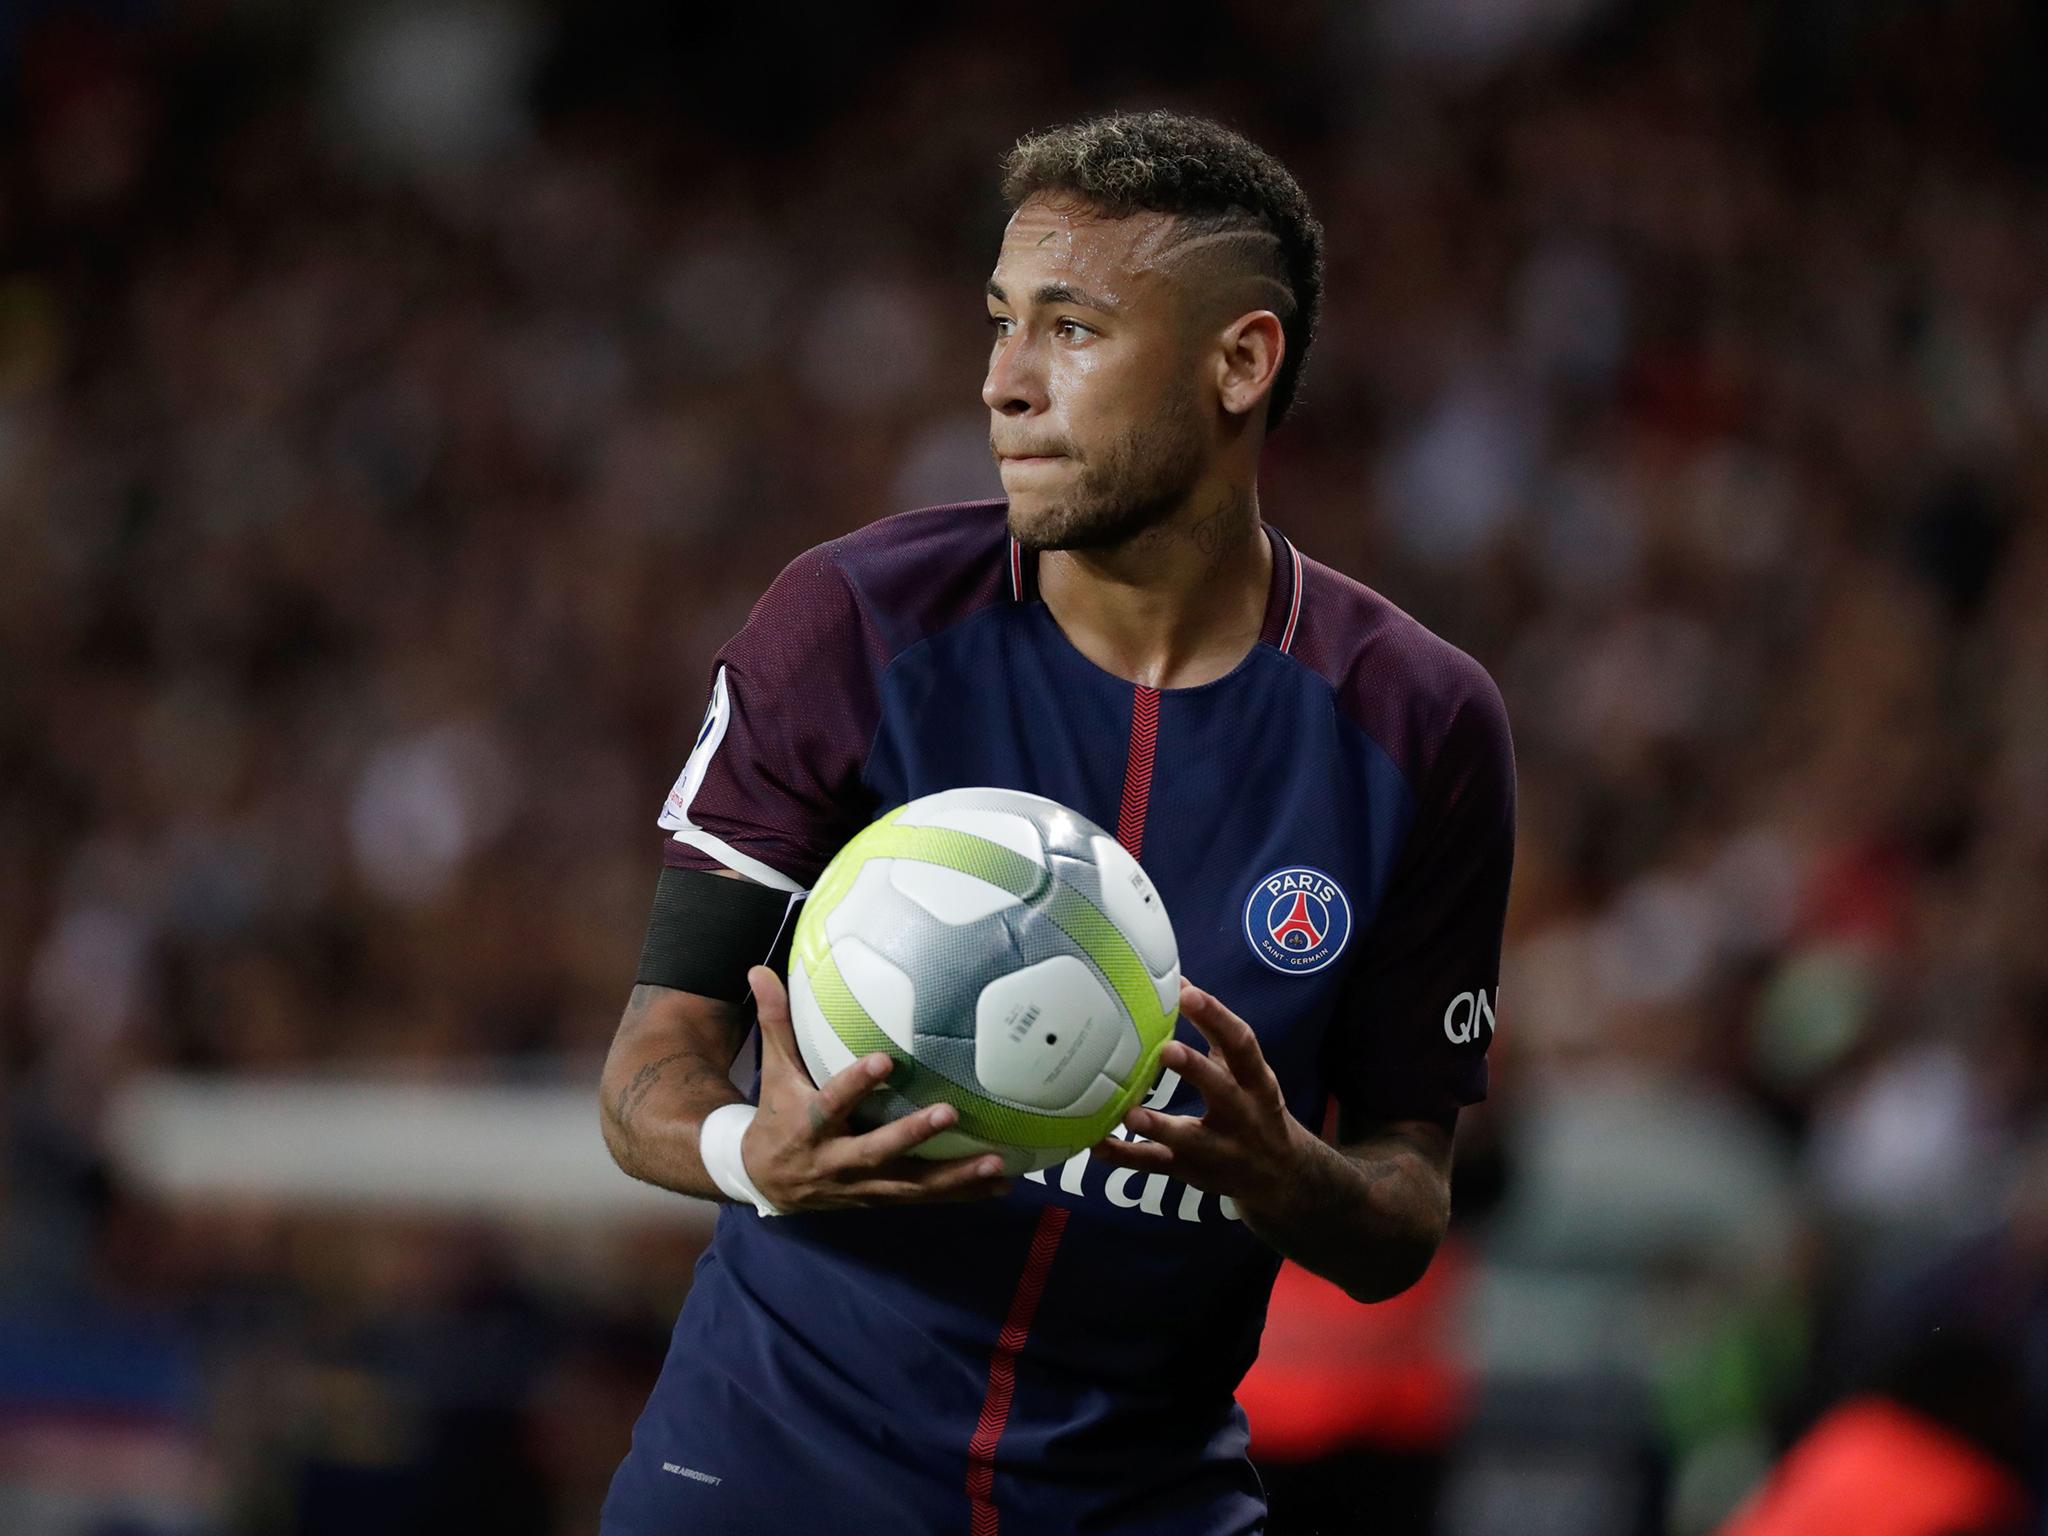 The recently-departed Neymar has criticised the board of directors at Barcelona